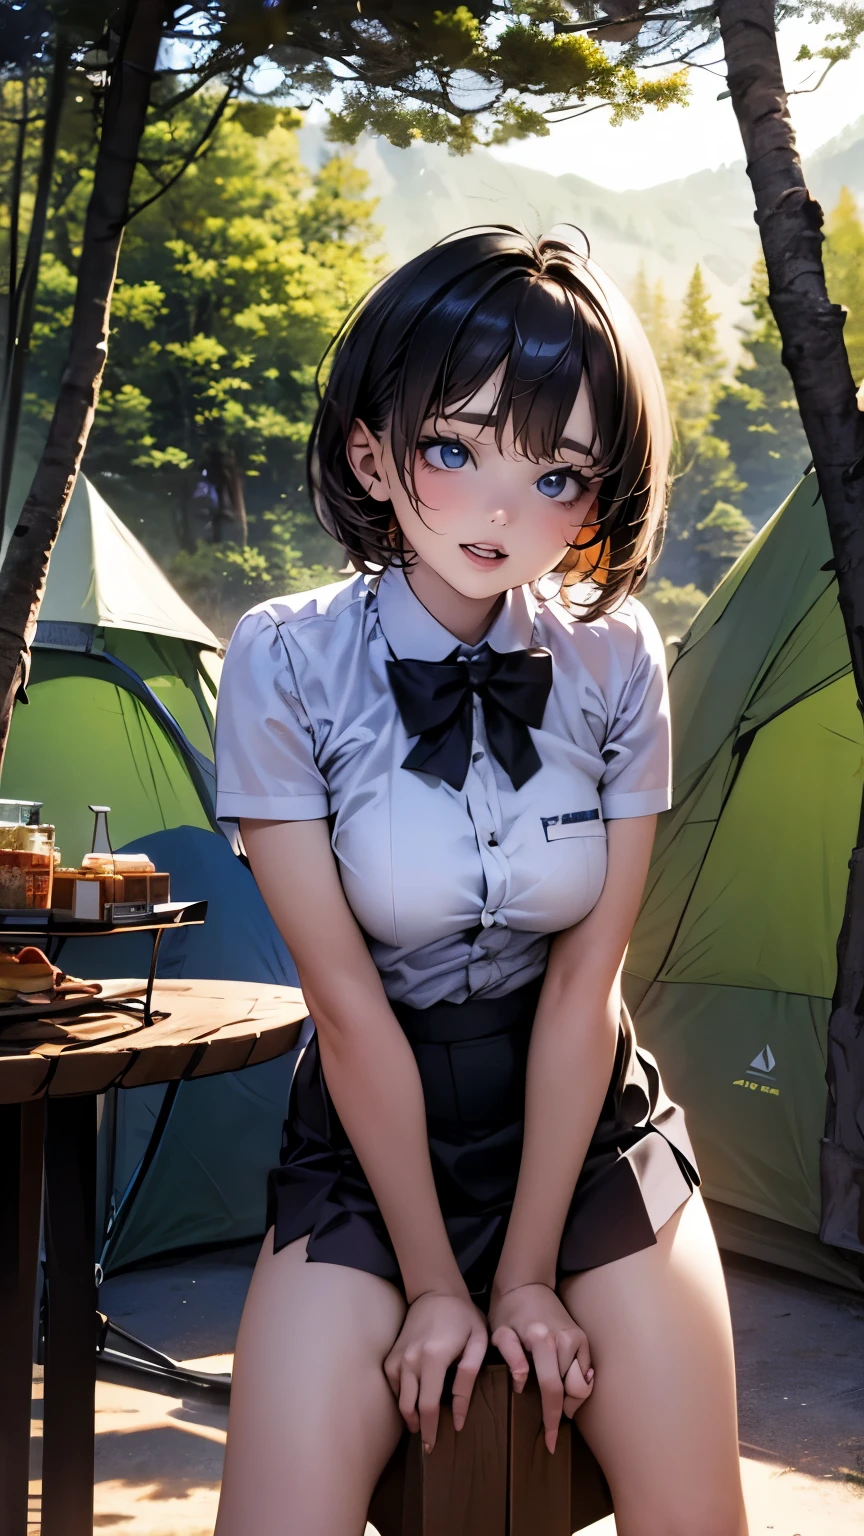 high-definition image, best quality, (round face), posing, eyes realistic sizing, drooping eyes, wearing only skirt and tiny mesh panties, open legs, standing and straddling a corner of a table to hit her crotch for self pleasure, big sky, mountains, in the forest, sunlight, short hair, (many camping gears),